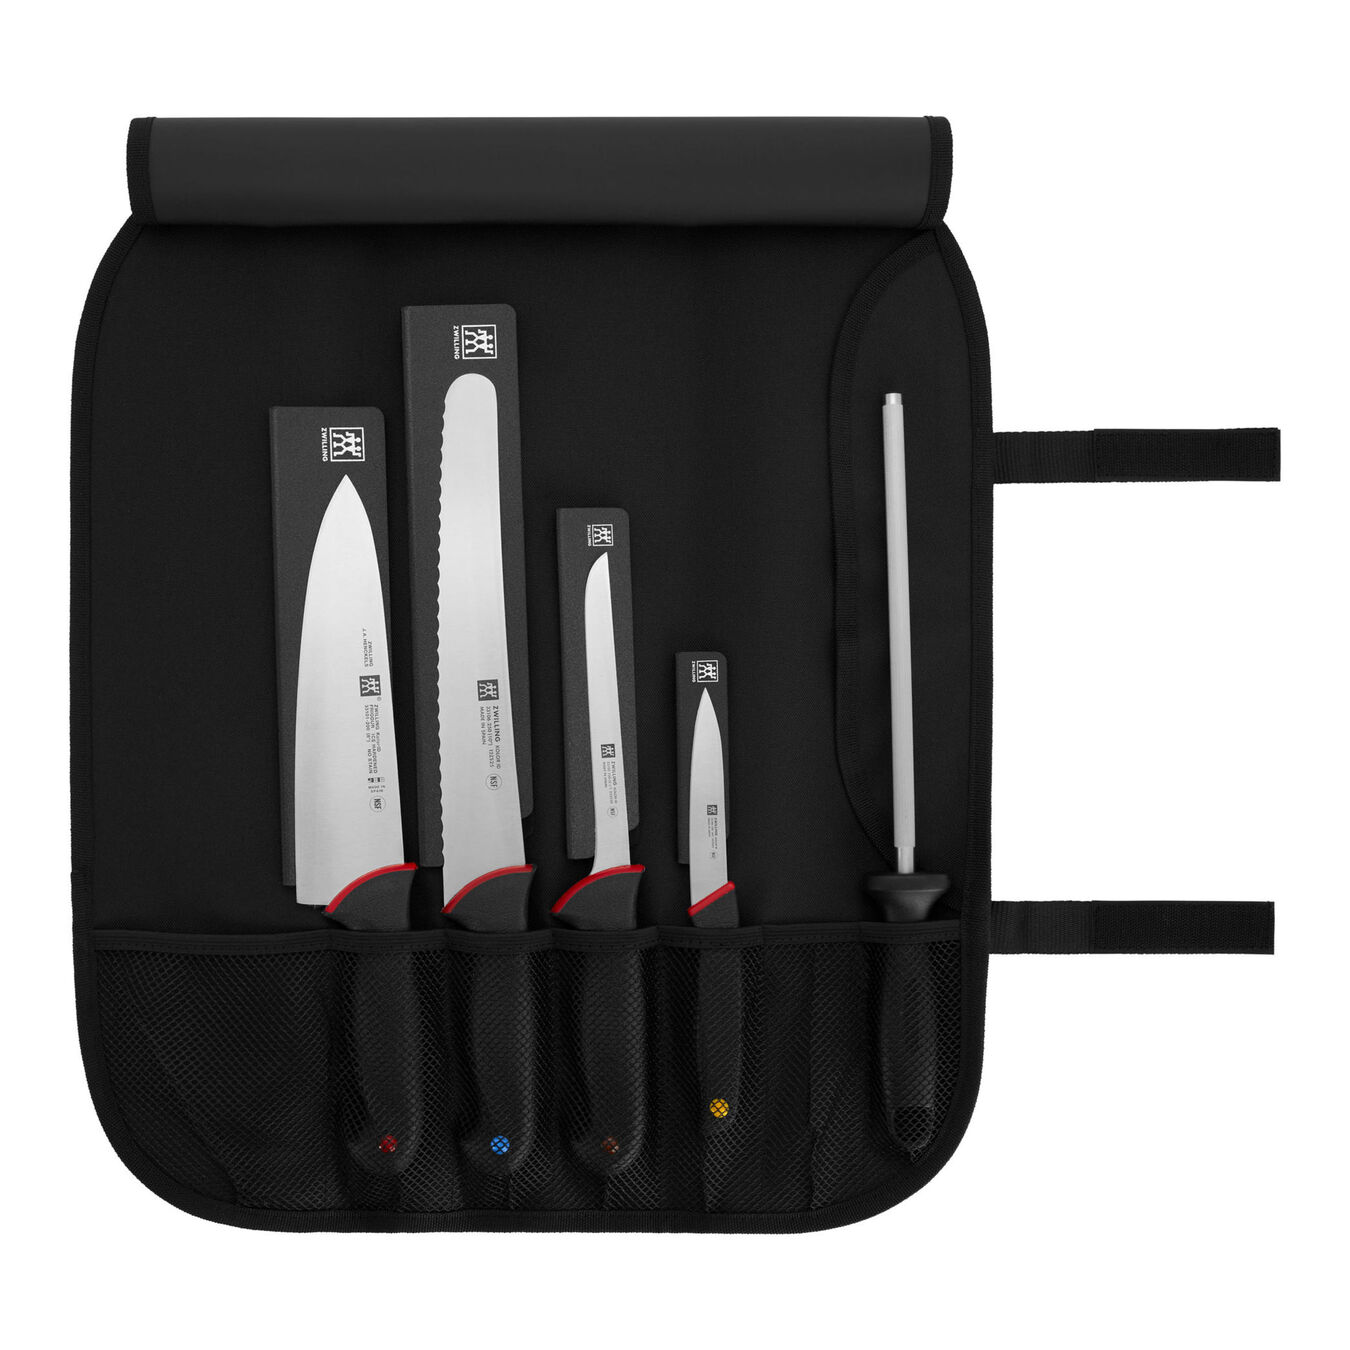 6-pc Culinary School Knife Kit with Blade Guards Nitrum Stainless Steel,,large 1